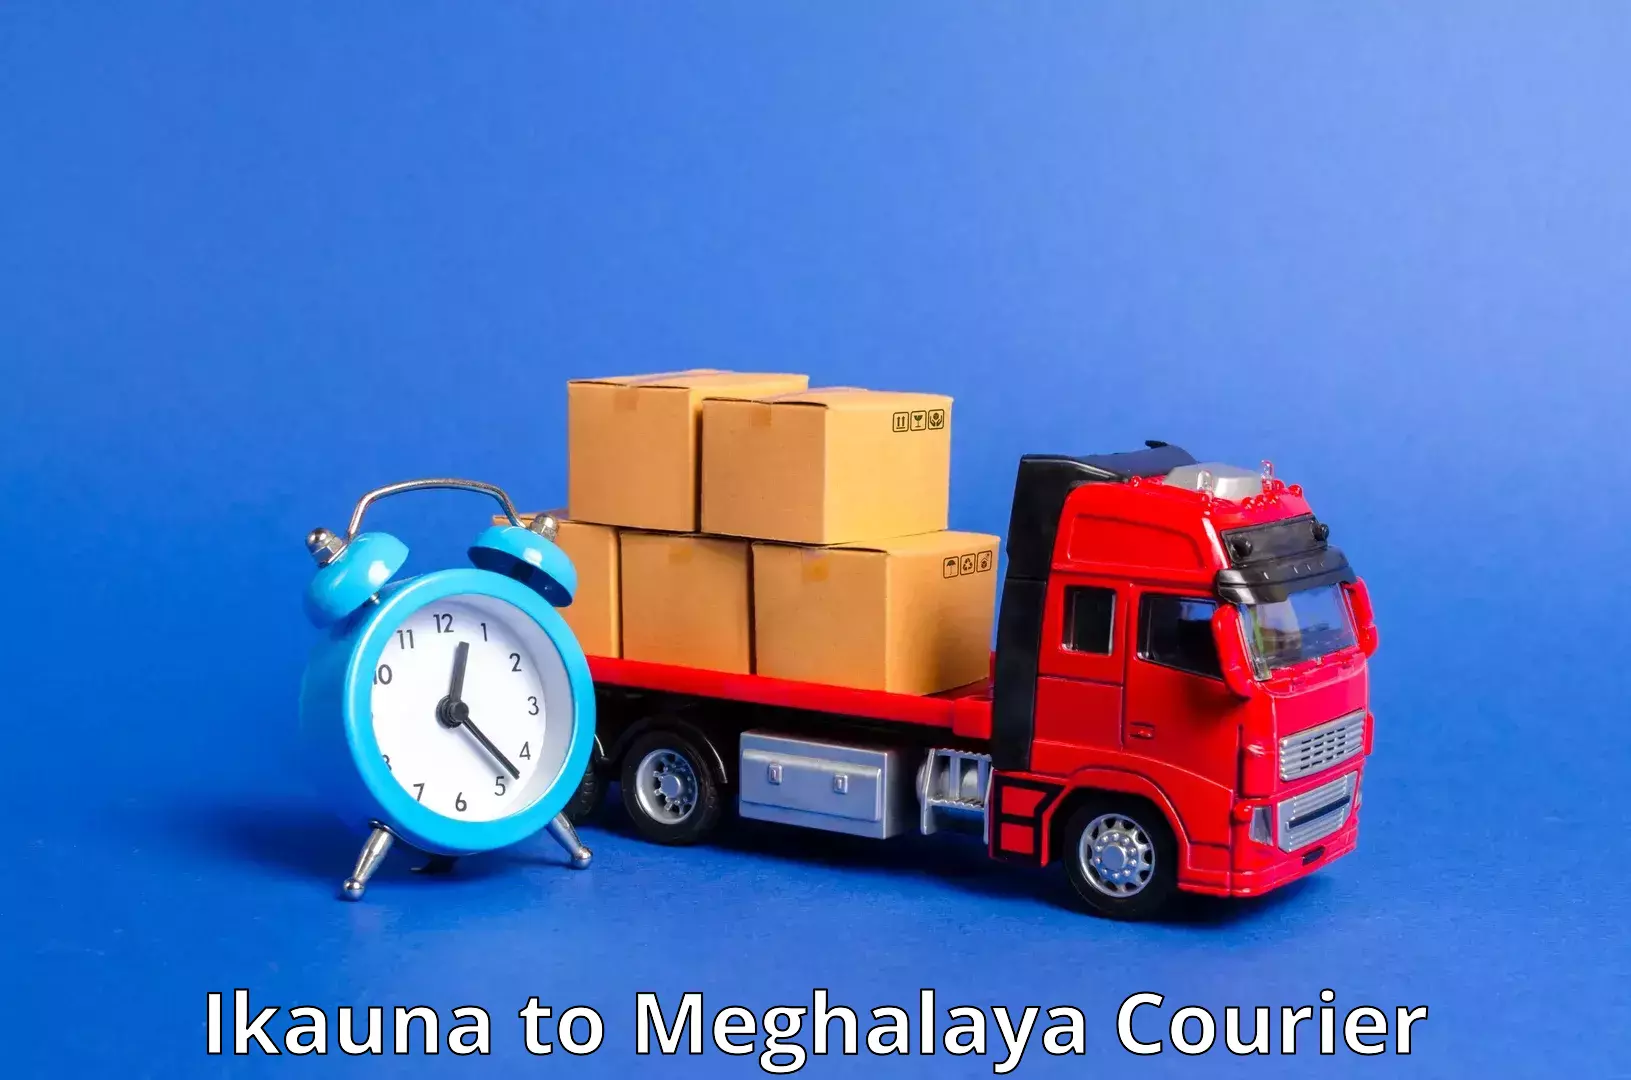 Express delivery solutions Ikauna to Shillong